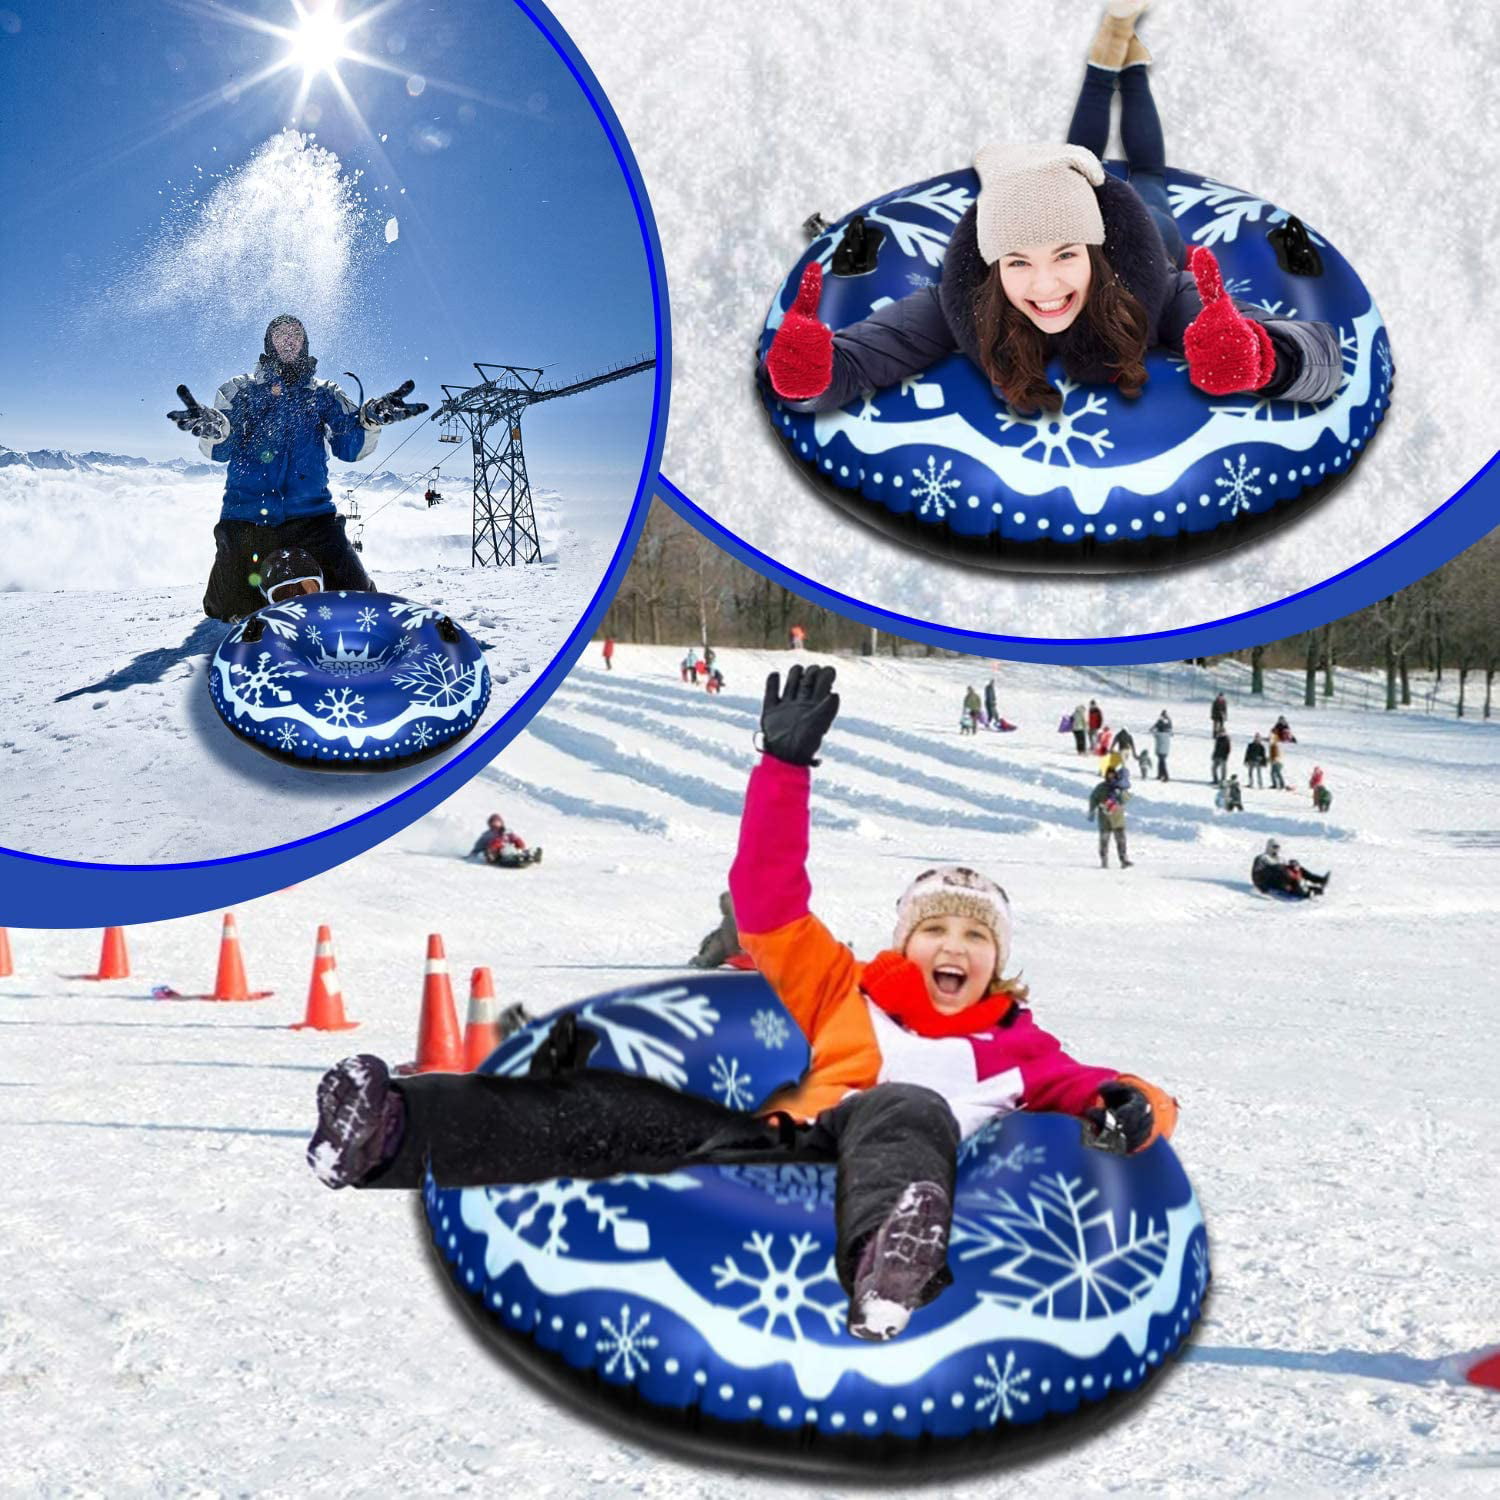 47 Inch Snow Tubes Snow Sled Inflatable Sleds for Kids and Adult for Floating with 2 Handles,Snow Tubes for Sledding Heavy Duty,Winter Snow Toys Kit Tubes by Thickening Material 0.5mm 